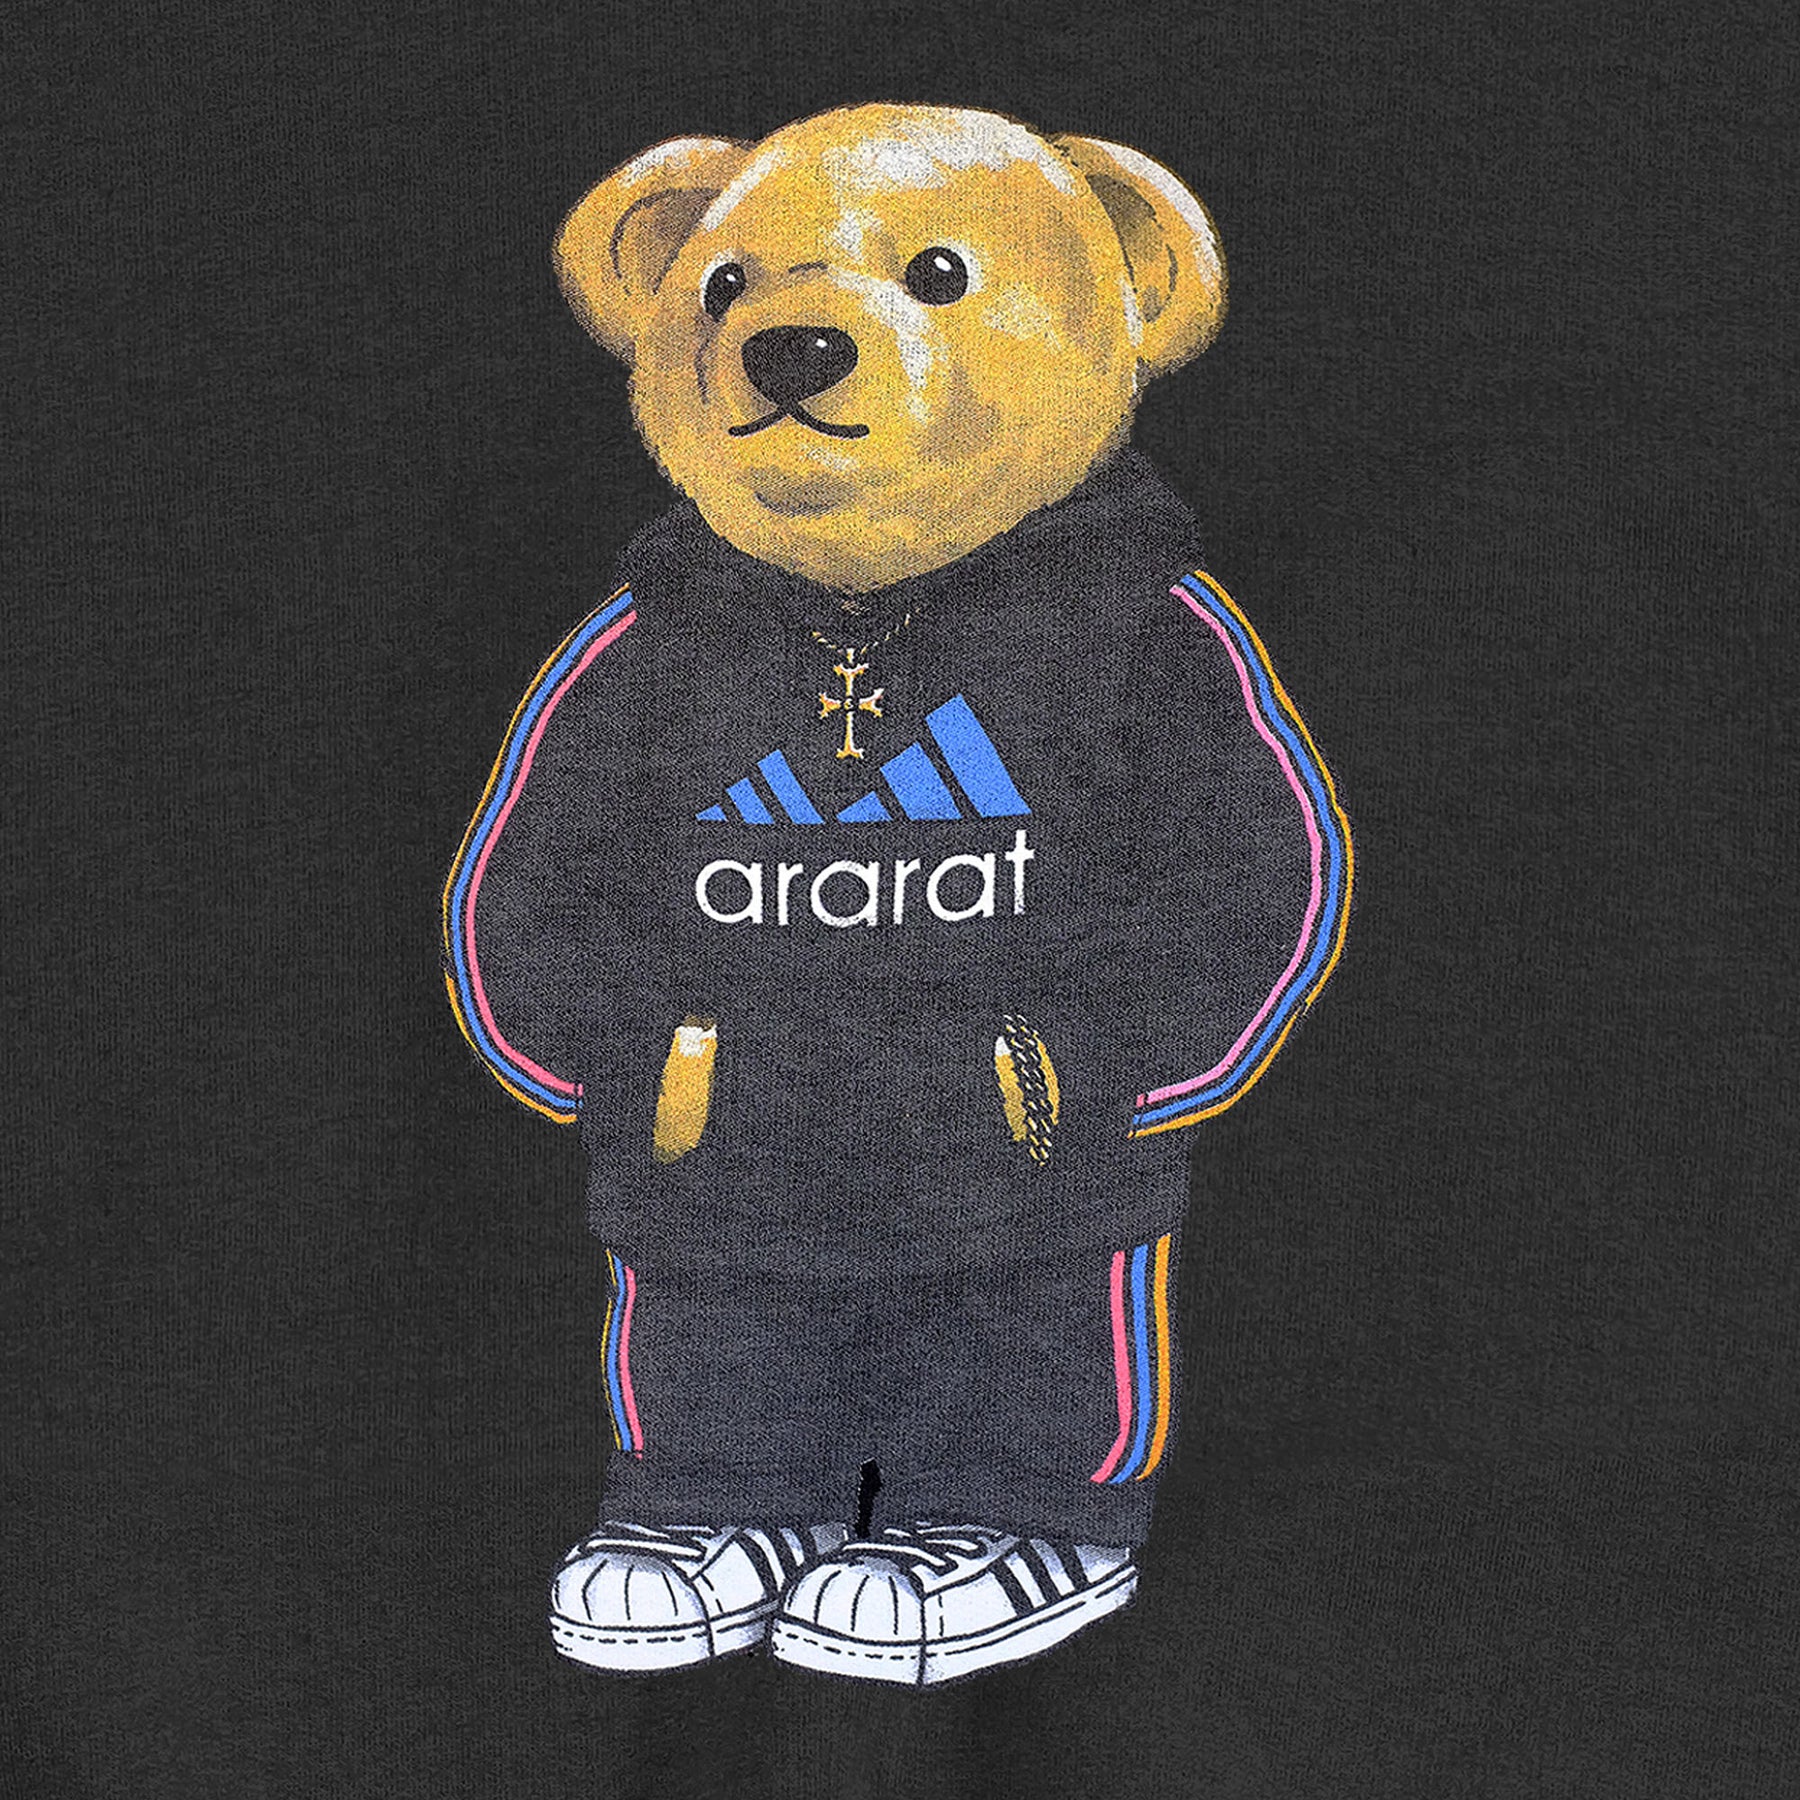 🚨ONLY ONE🚨 Archie Bear by Raffi Lauren - Crew Neck Sweater - LARGE